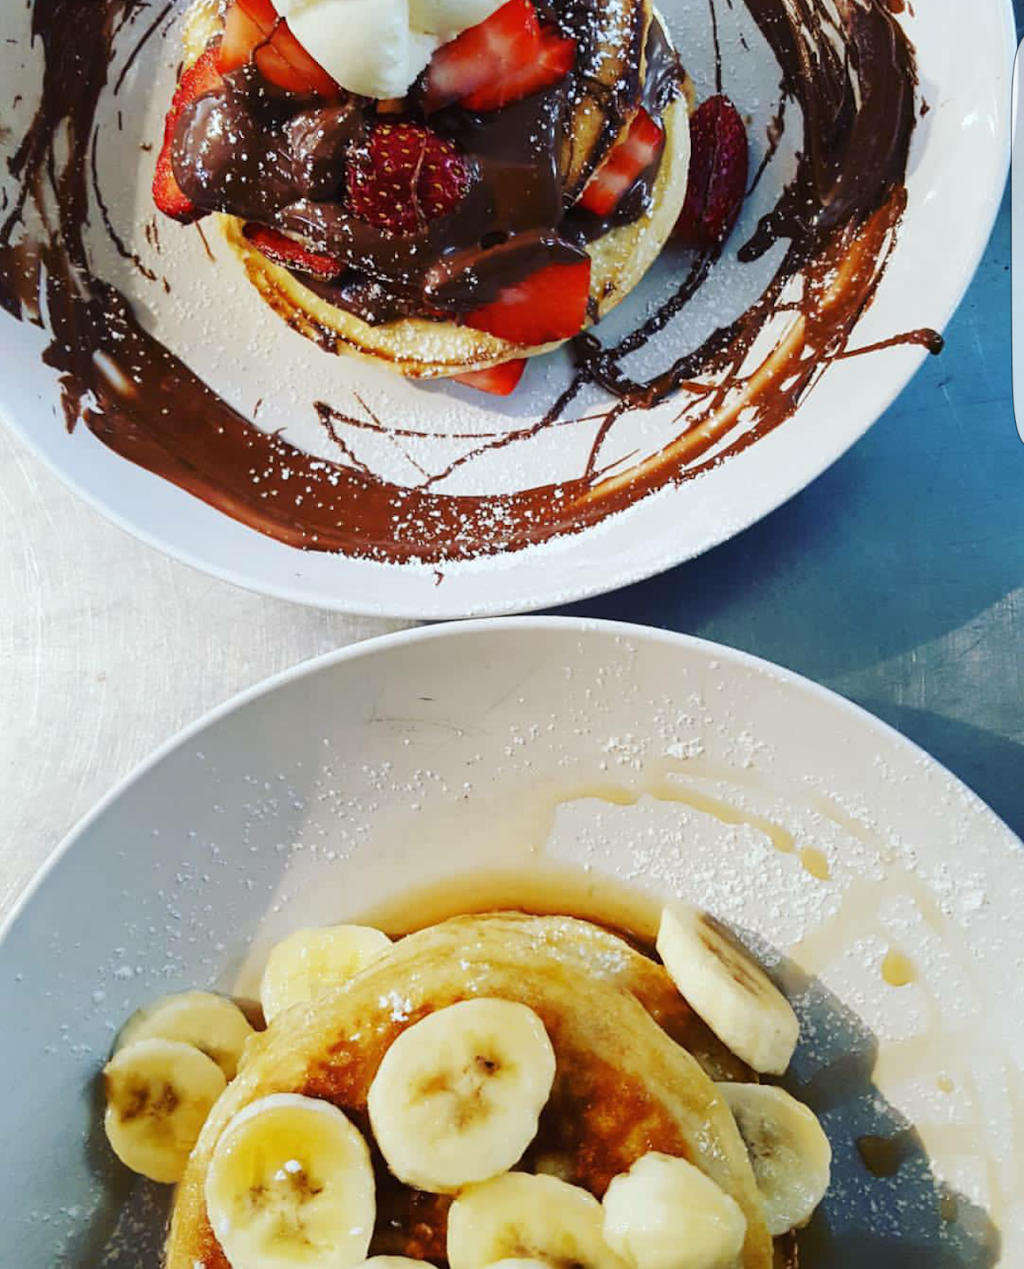 Zanders Cafe And Dessert Bar | cafe | 3/215 Gipps Rd, Keiraville NSW 2500, Australia | 0242276483 OR +61 2 4227 6483